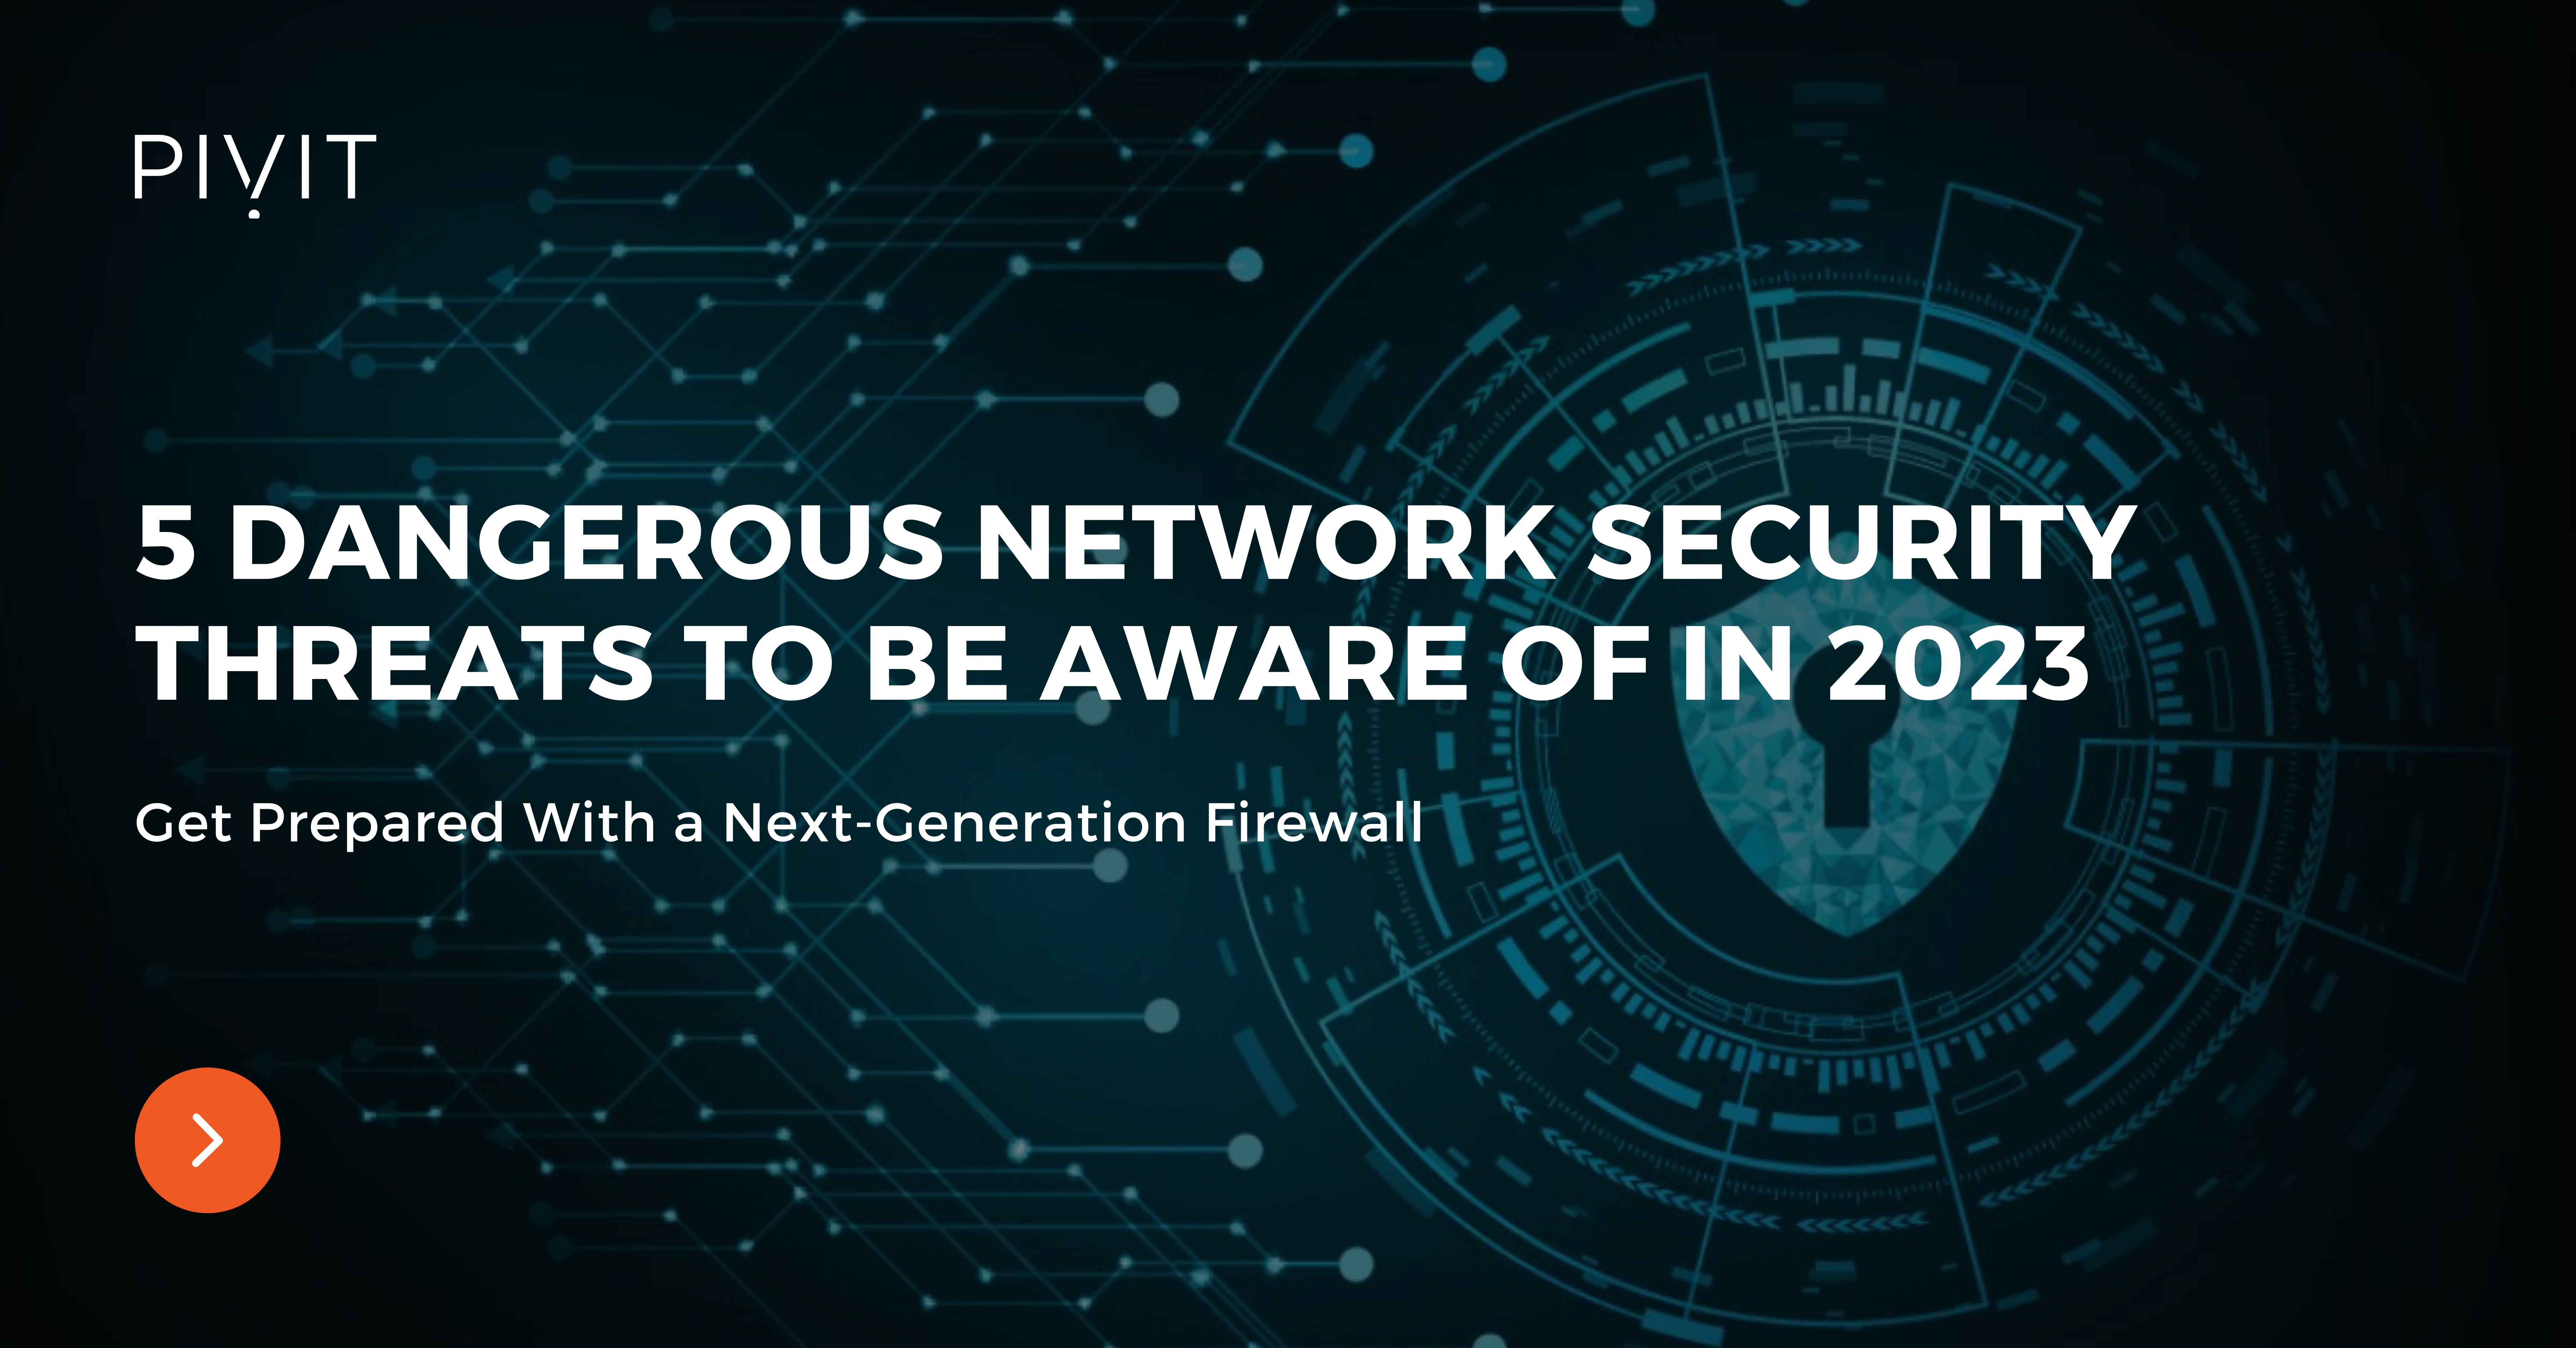 5 Dangerous Network Security Threats to Be Aware of in 2023